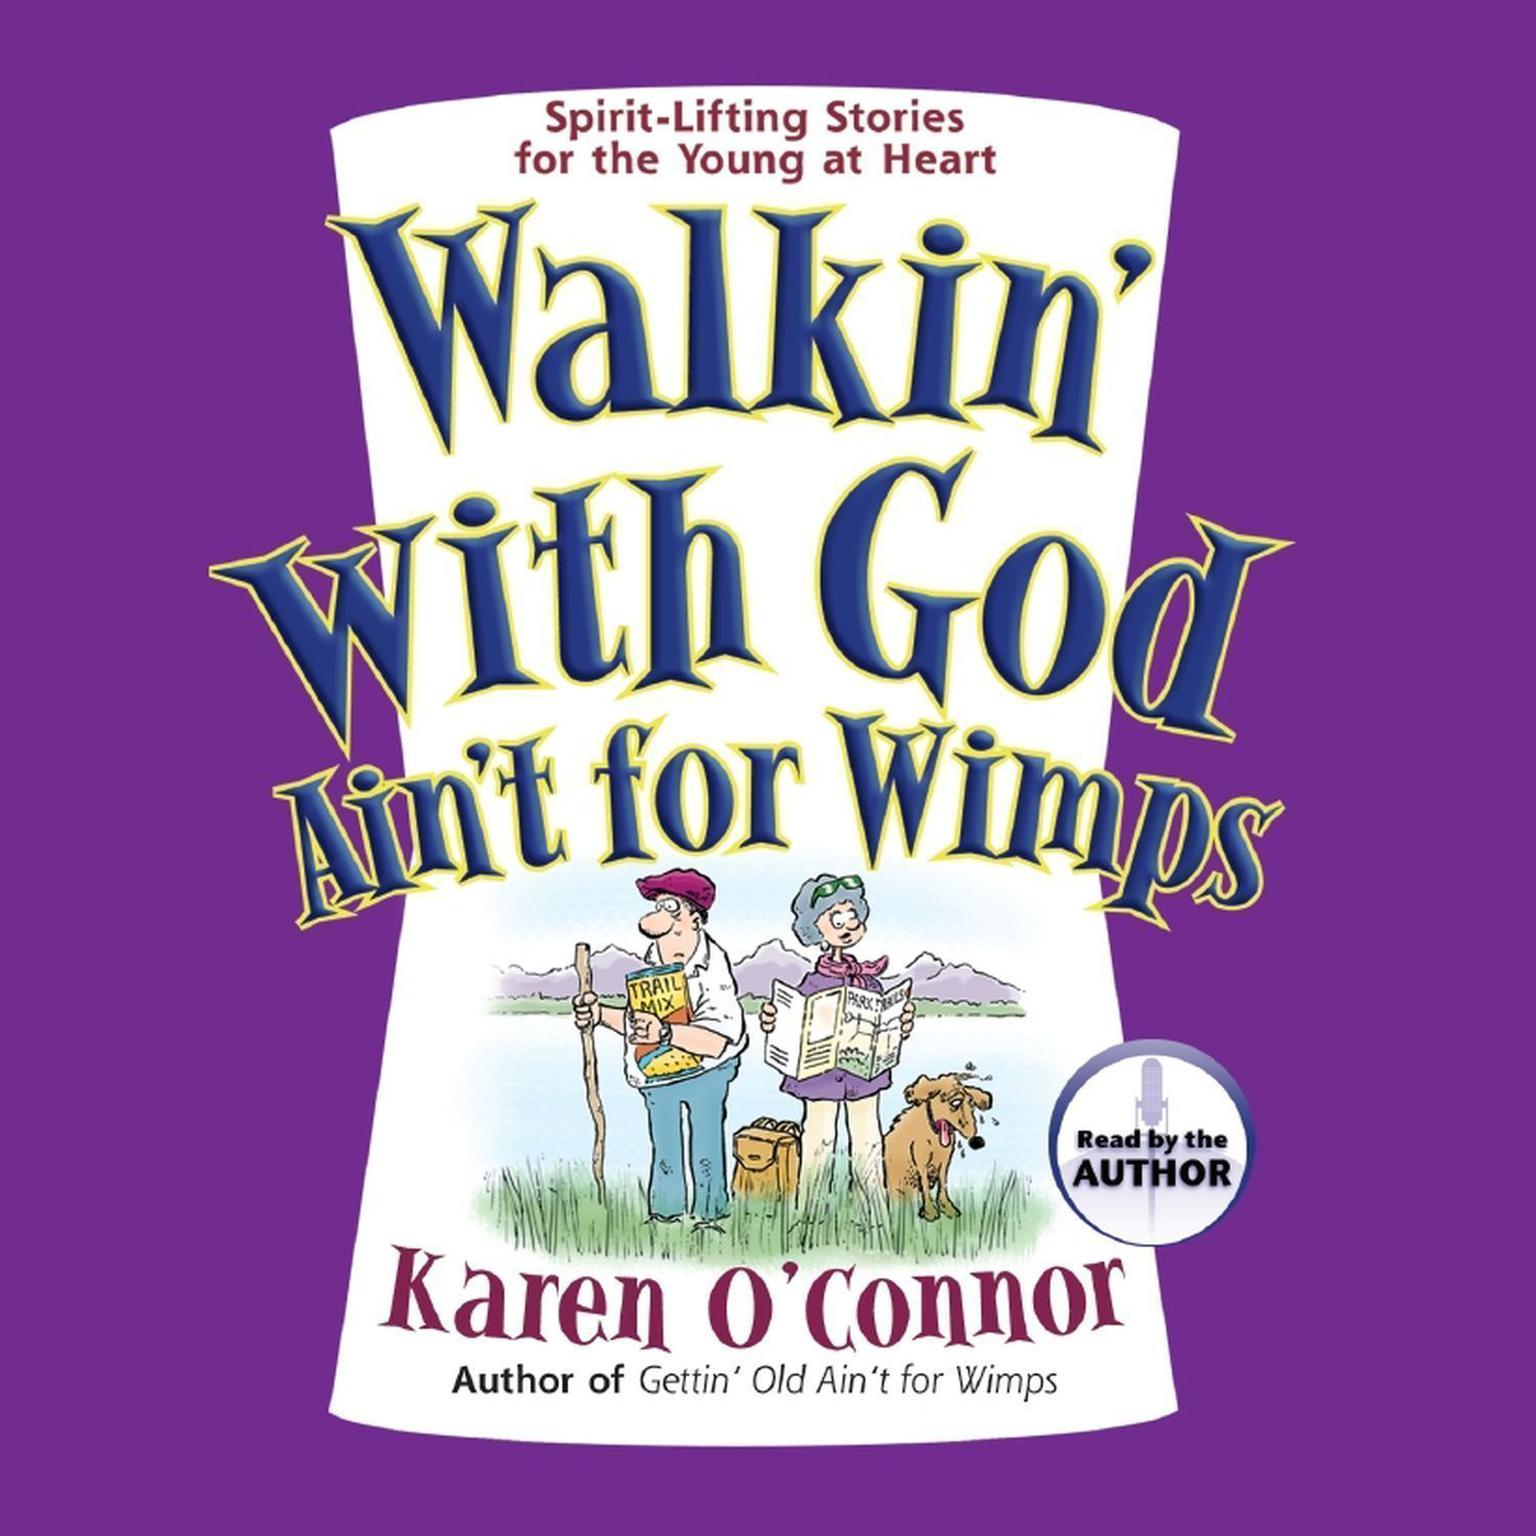 Walkin With God Aint for Wimps: Spirit-Lifting Stories for the Young at Heart Audiobook, by Karen O’Connor